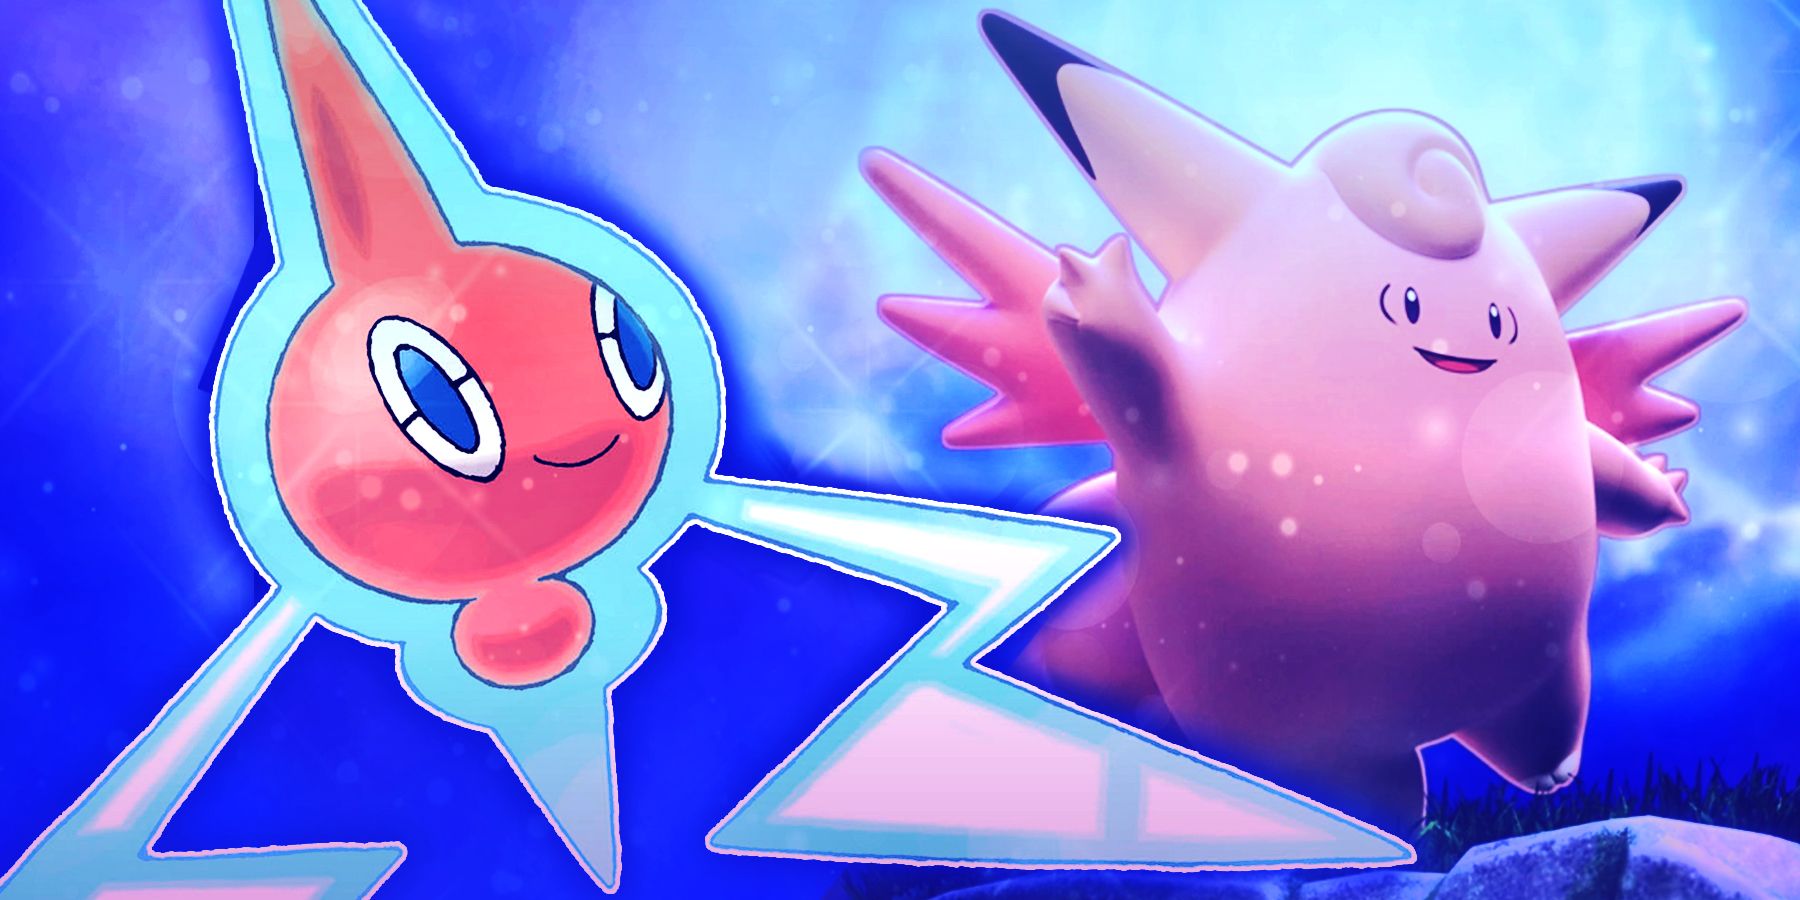 Custom Image of Rotom and Clefable from Pokemon